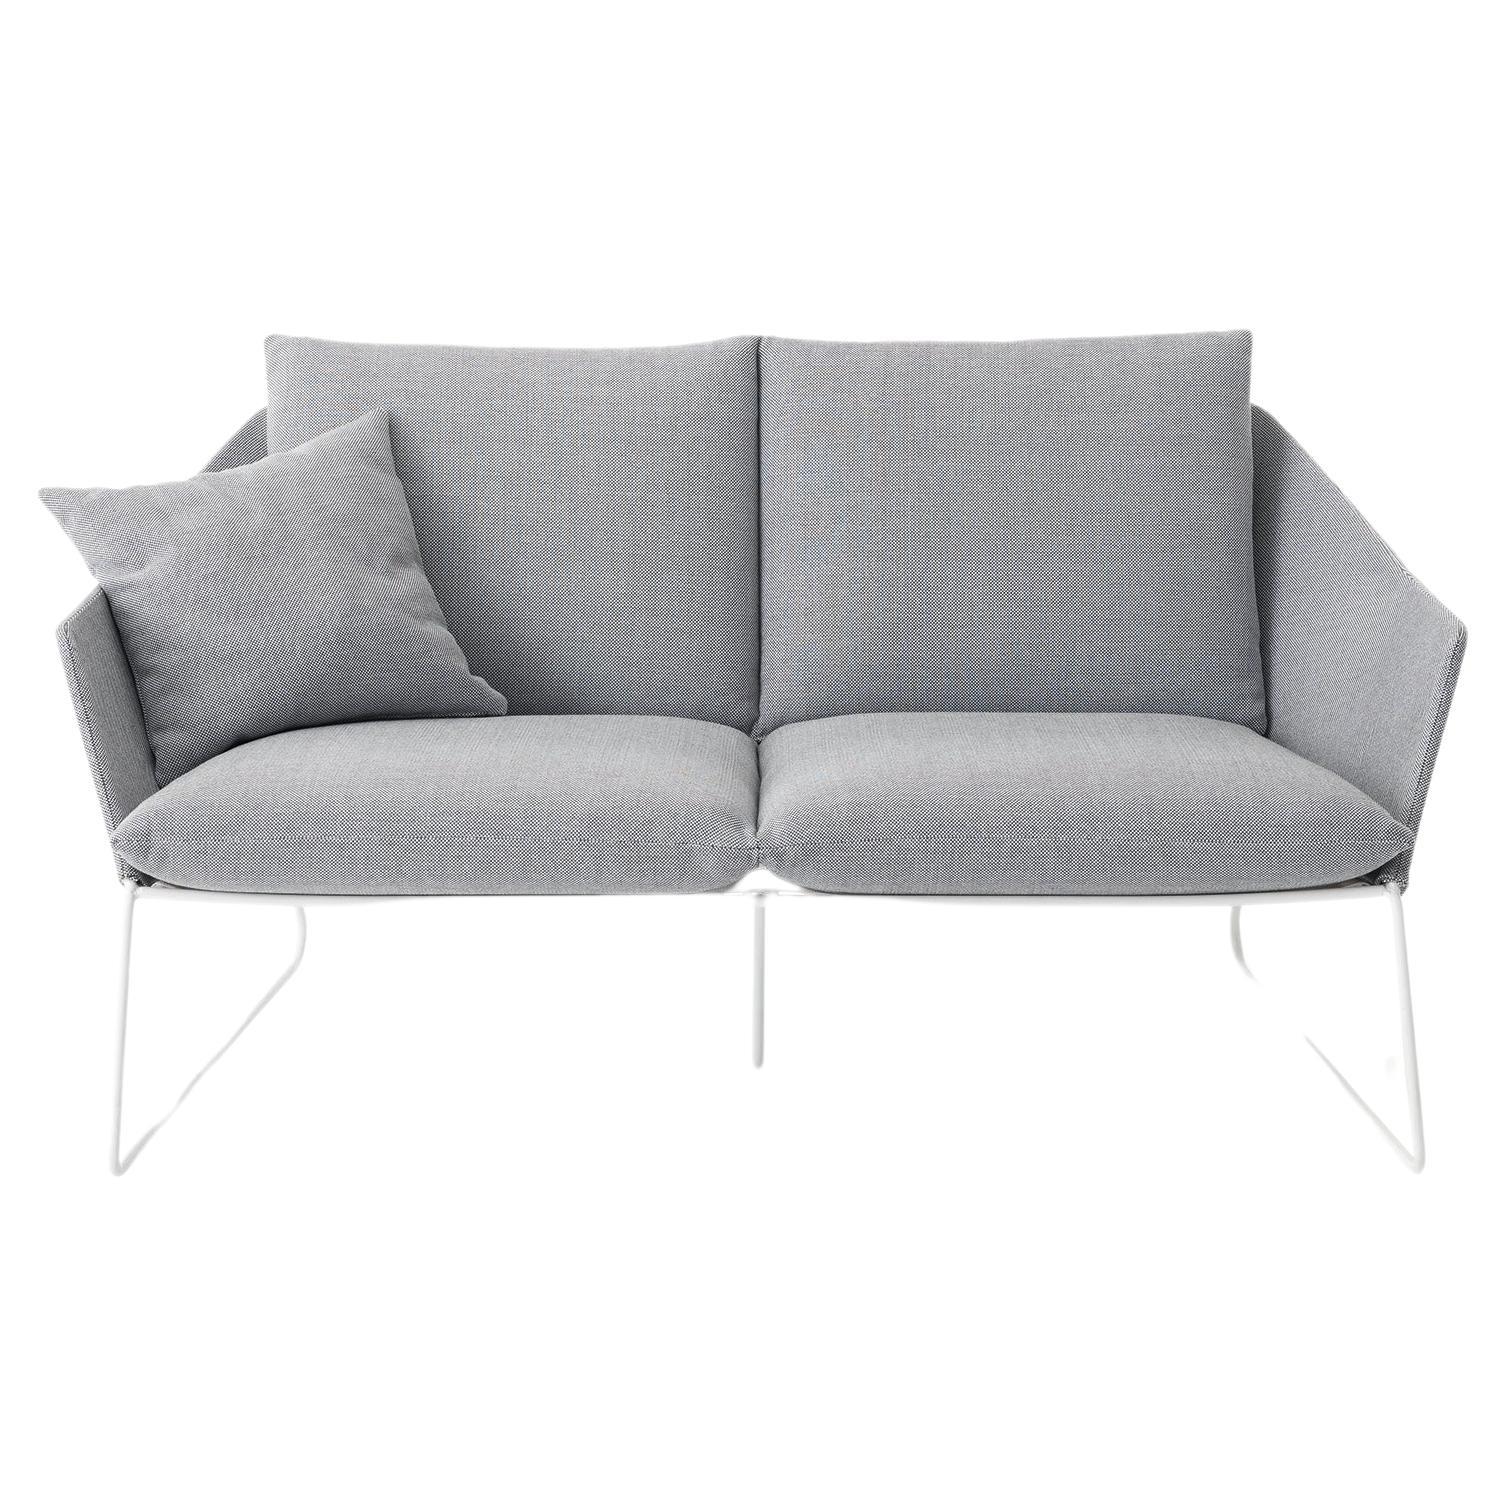 New York Outdoor Sofa in Vip Grey Upholstery with White Legs by Sergio Bicego For Sale